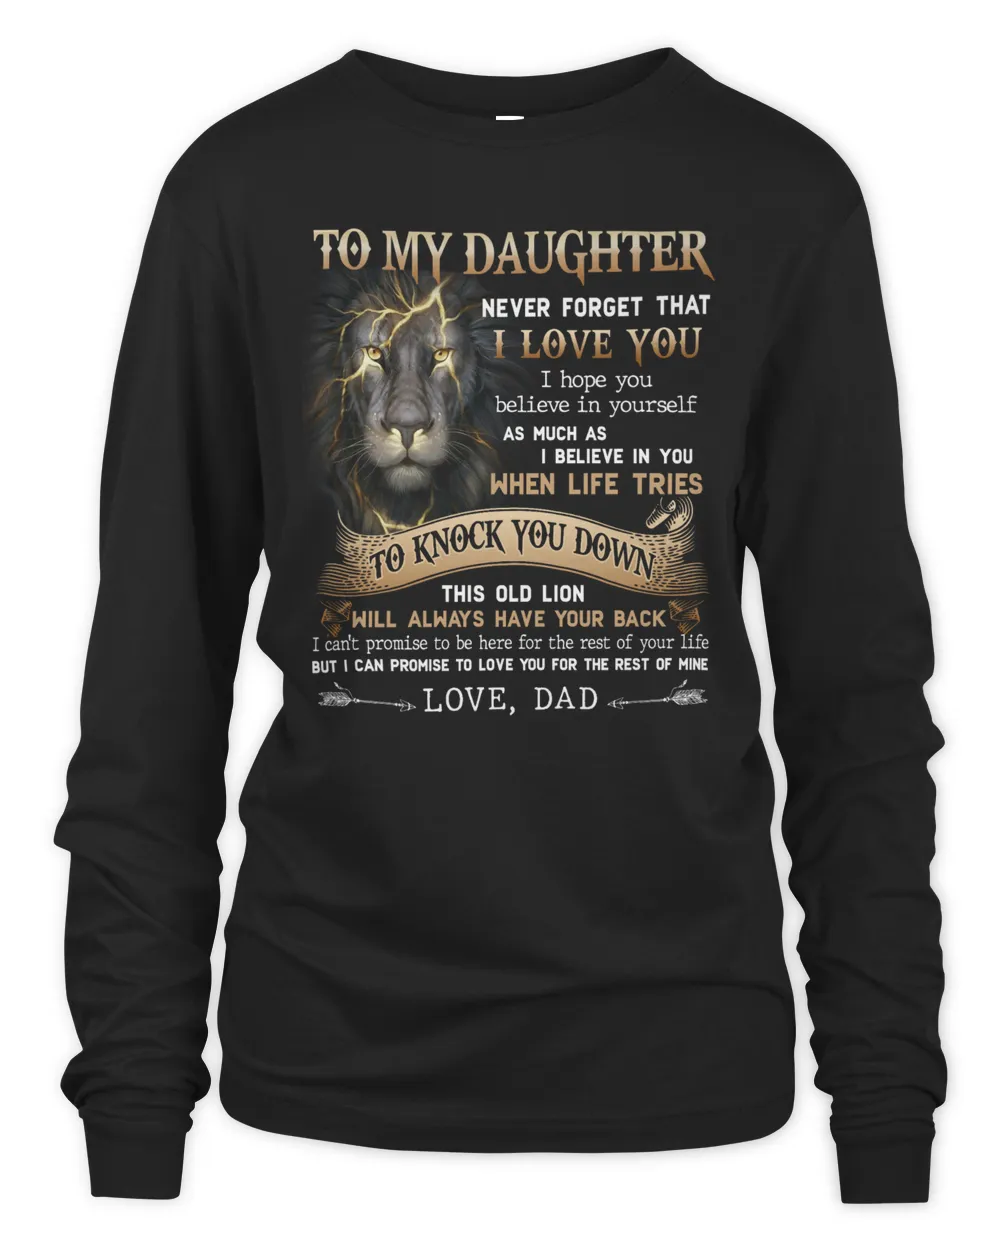 To my DAUGHTER never forget that I love you